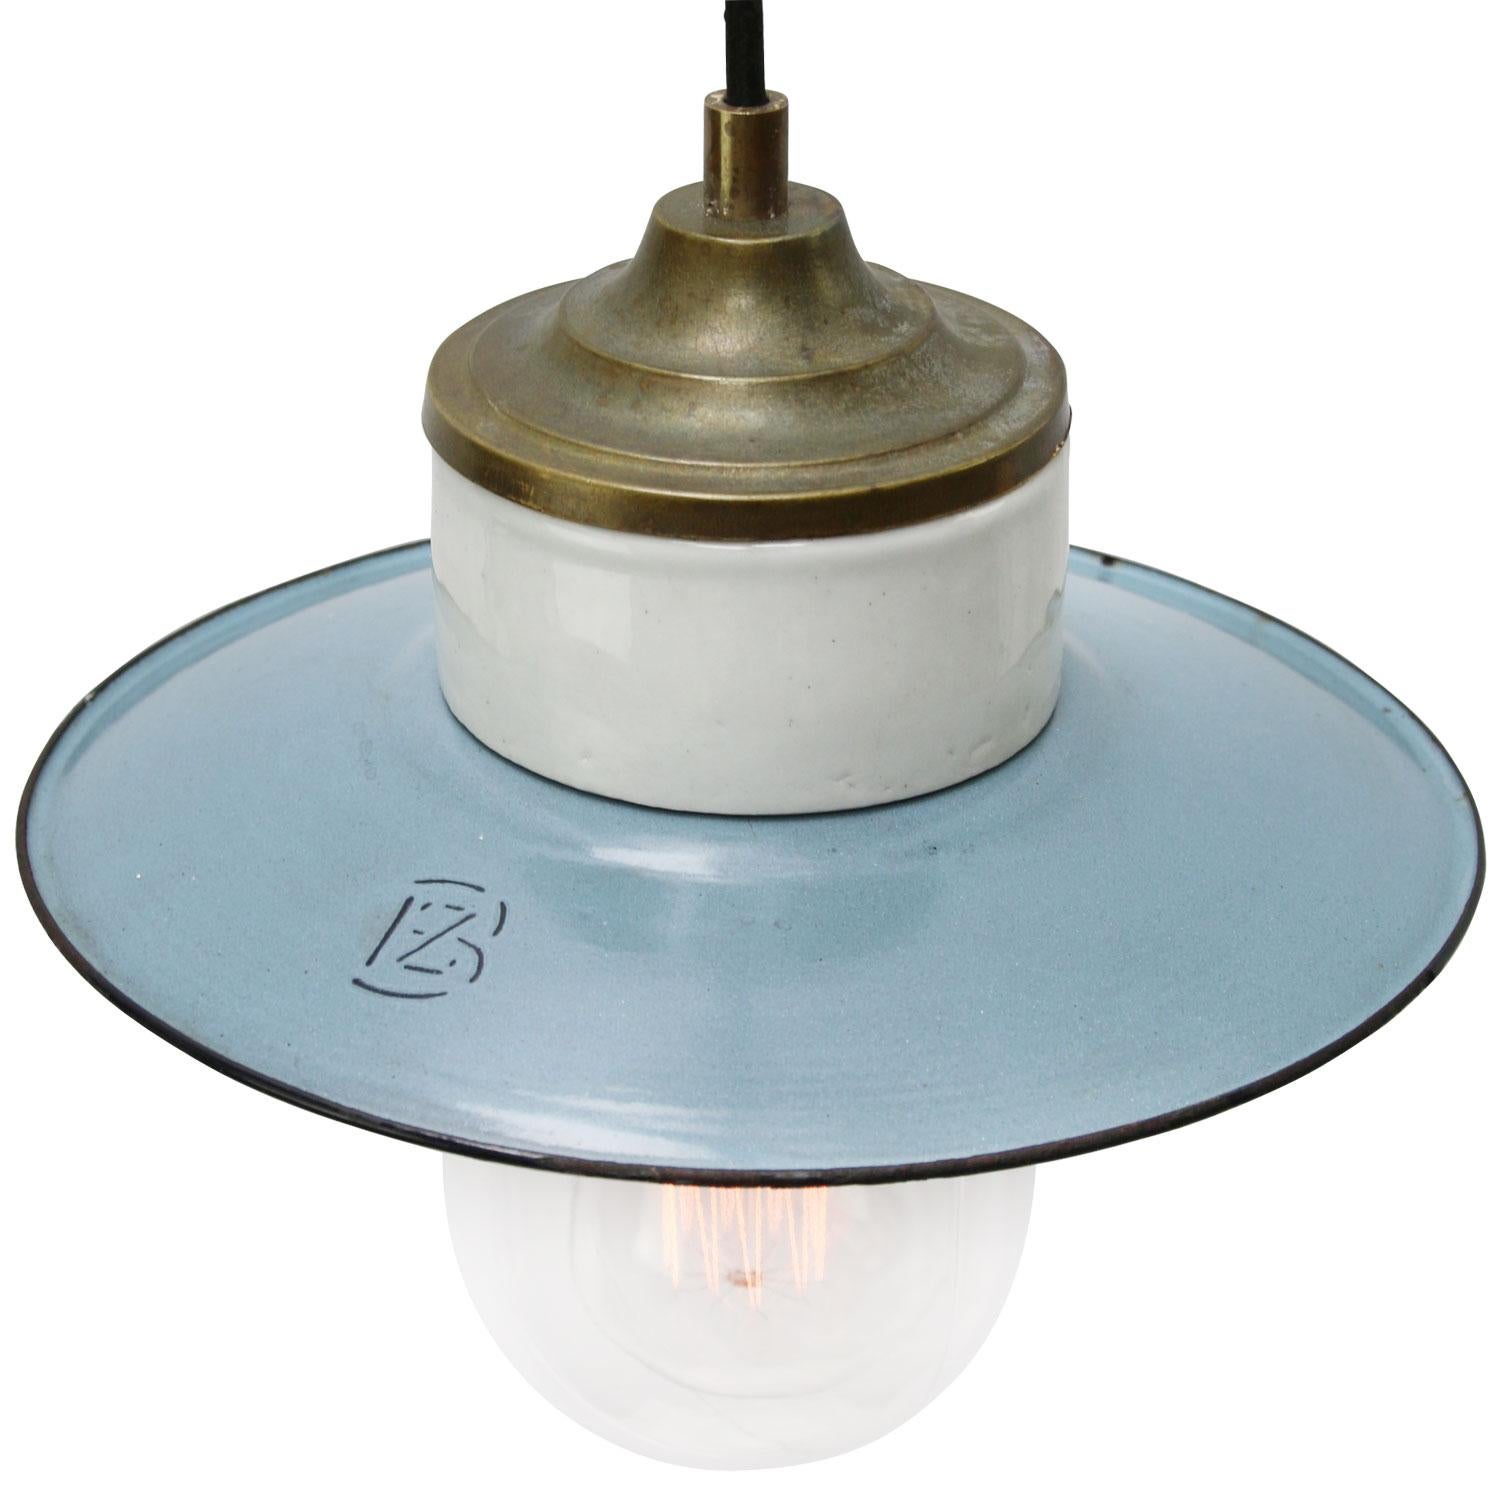 Porcelain Industrial hanging lamp.
Light blue porcelain, brass and clear glass.
Enamel shade
2 conductors, no ground.

Weight: 1.40 kg / 3.1 lb

Priced per individual item. All lamps have been made suitable by international standards for